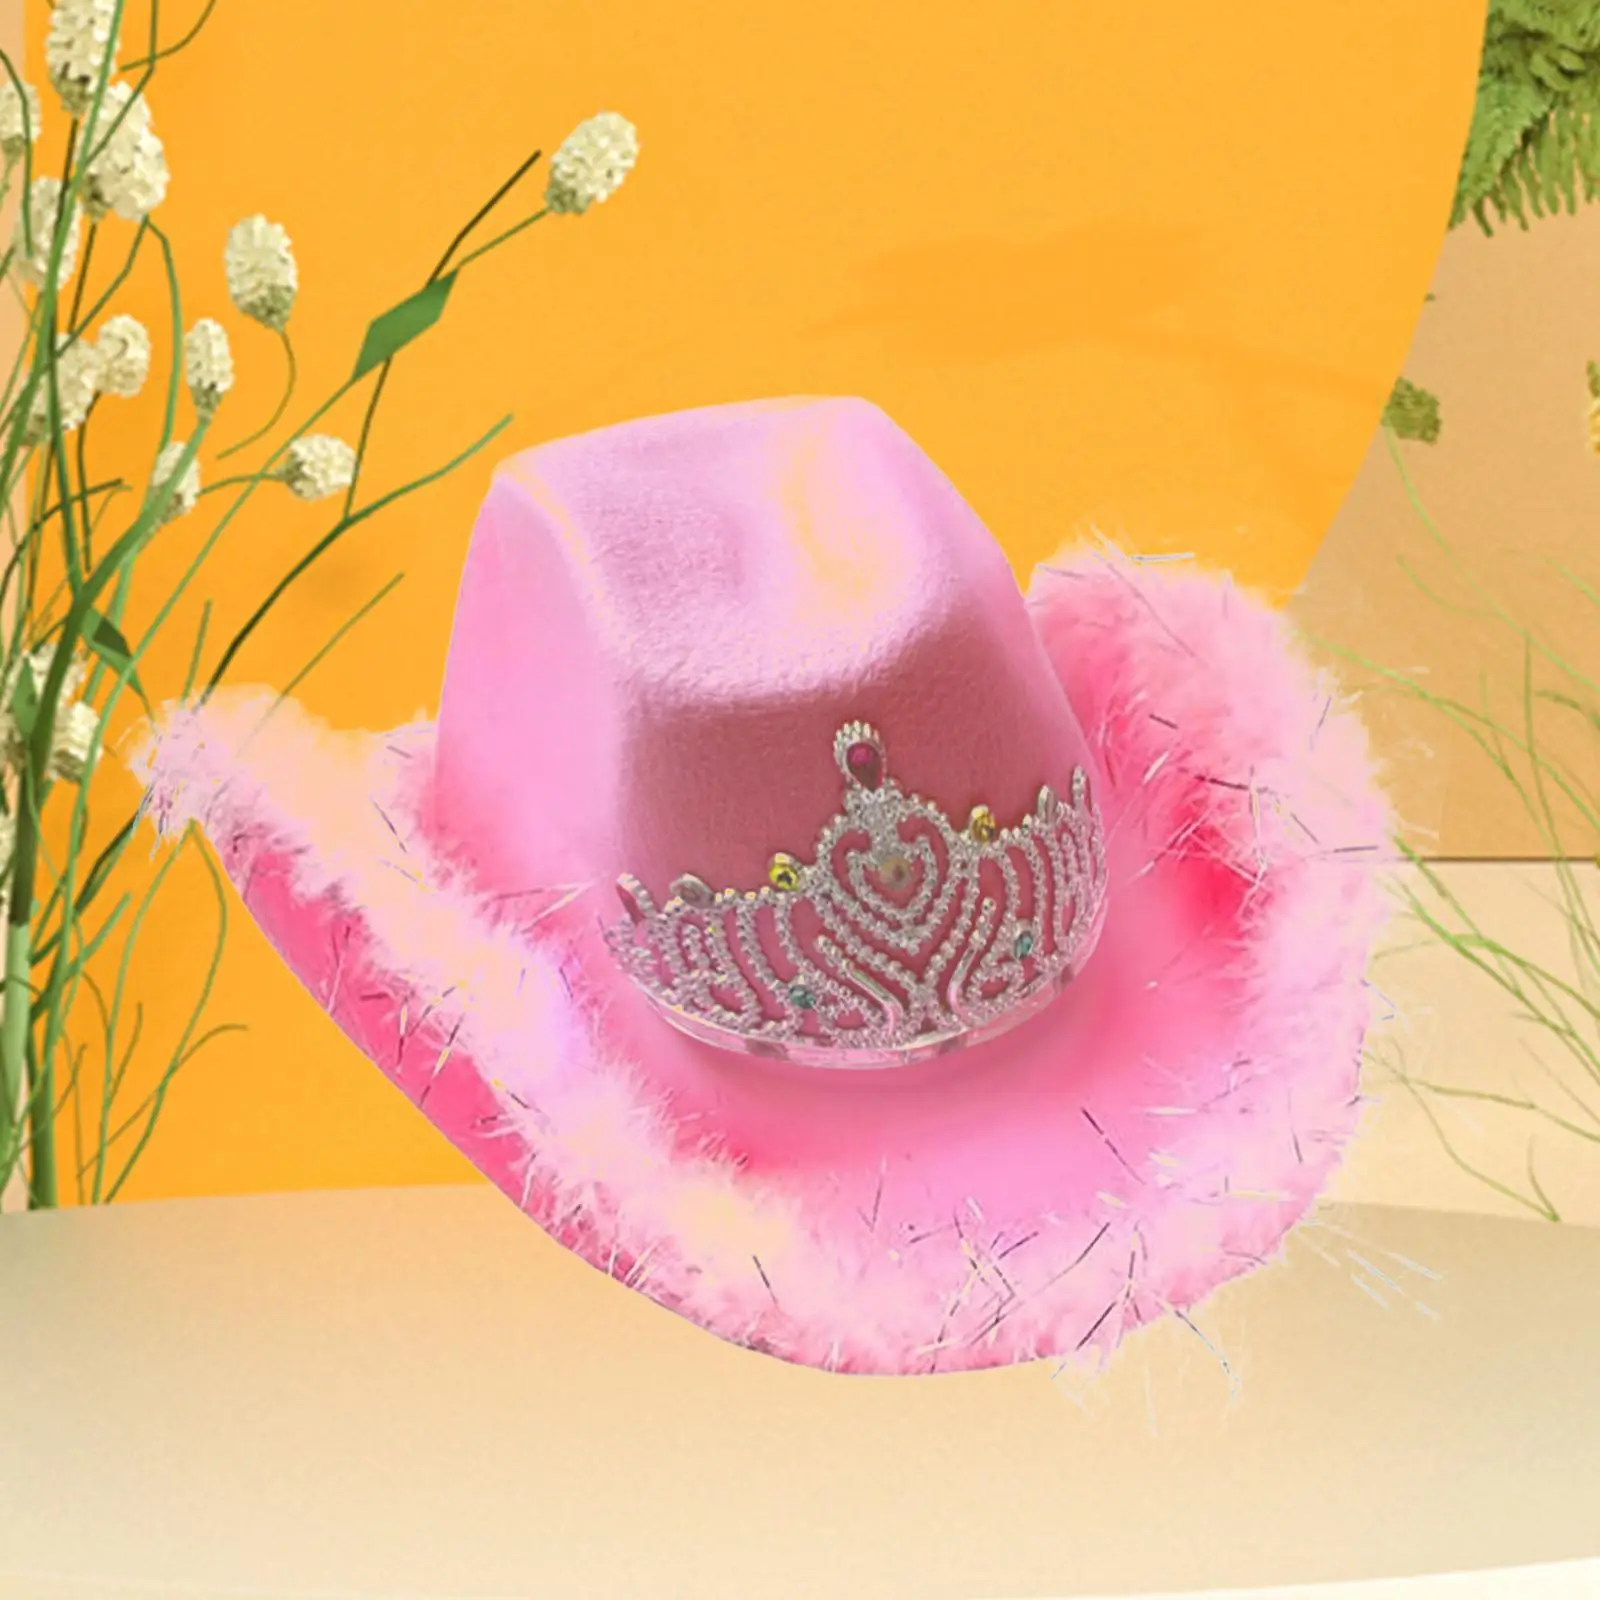 Western Cowboy Cowgirl Hat with Crown One Size Fits Most Wide Brim for Party Costume Pretend Play Decorations Women Girls